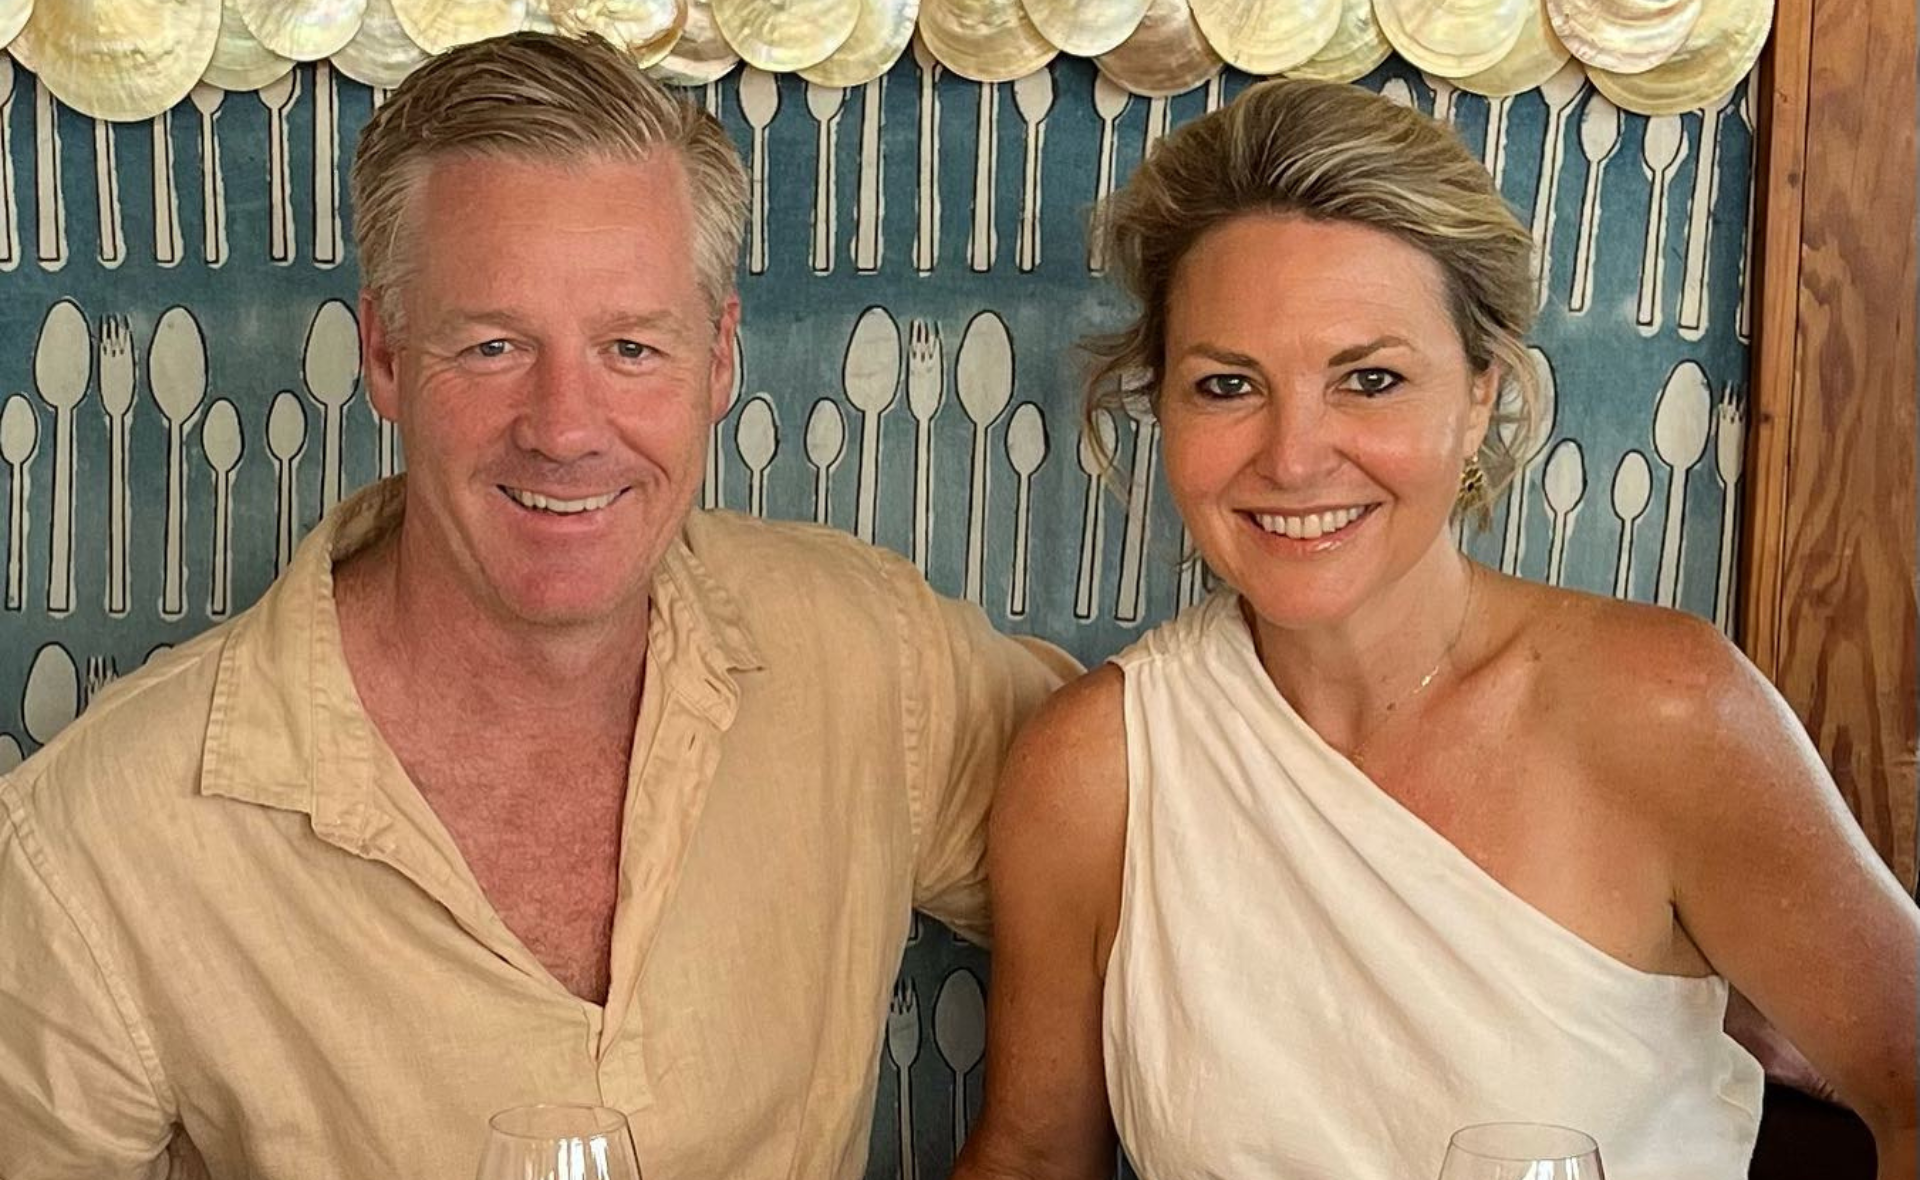 Georgie Gardner walked into a birthday party by chance, and walked out with her soulmate, Tim Baker